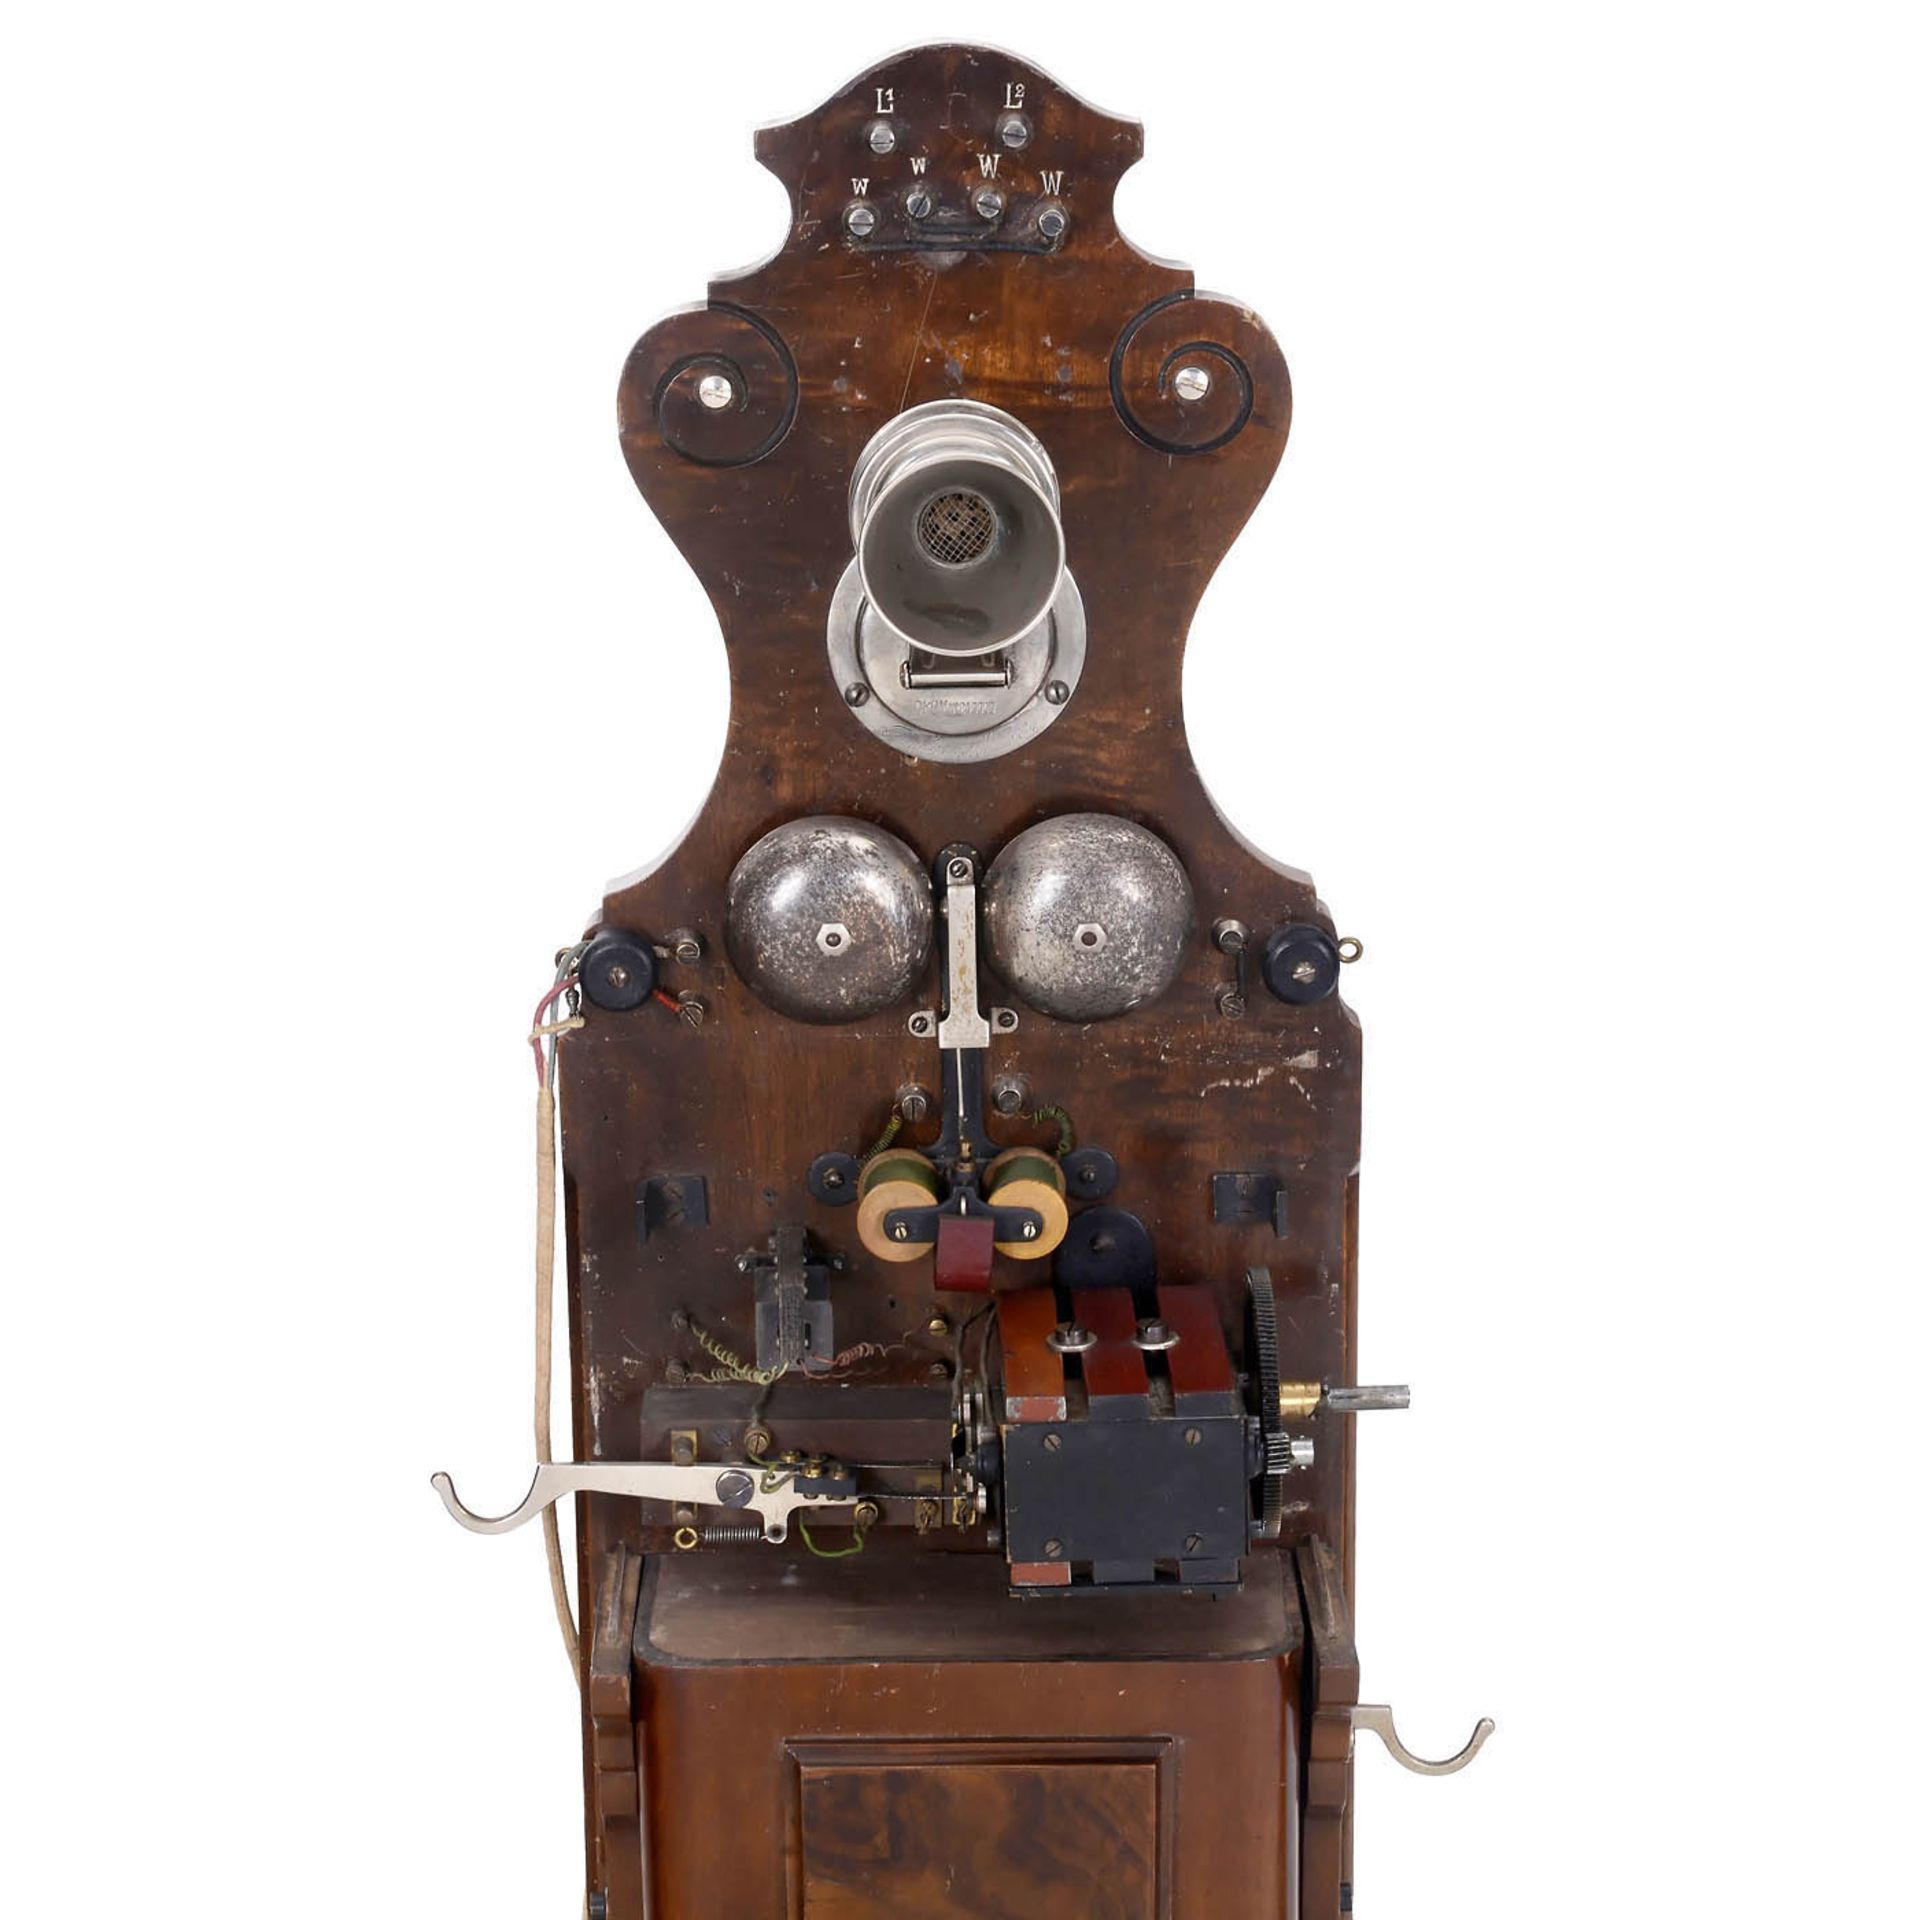 Bavarian Wall Telephone Station OB 99 by Reiner, 1899 onwards - Image 2 of 2